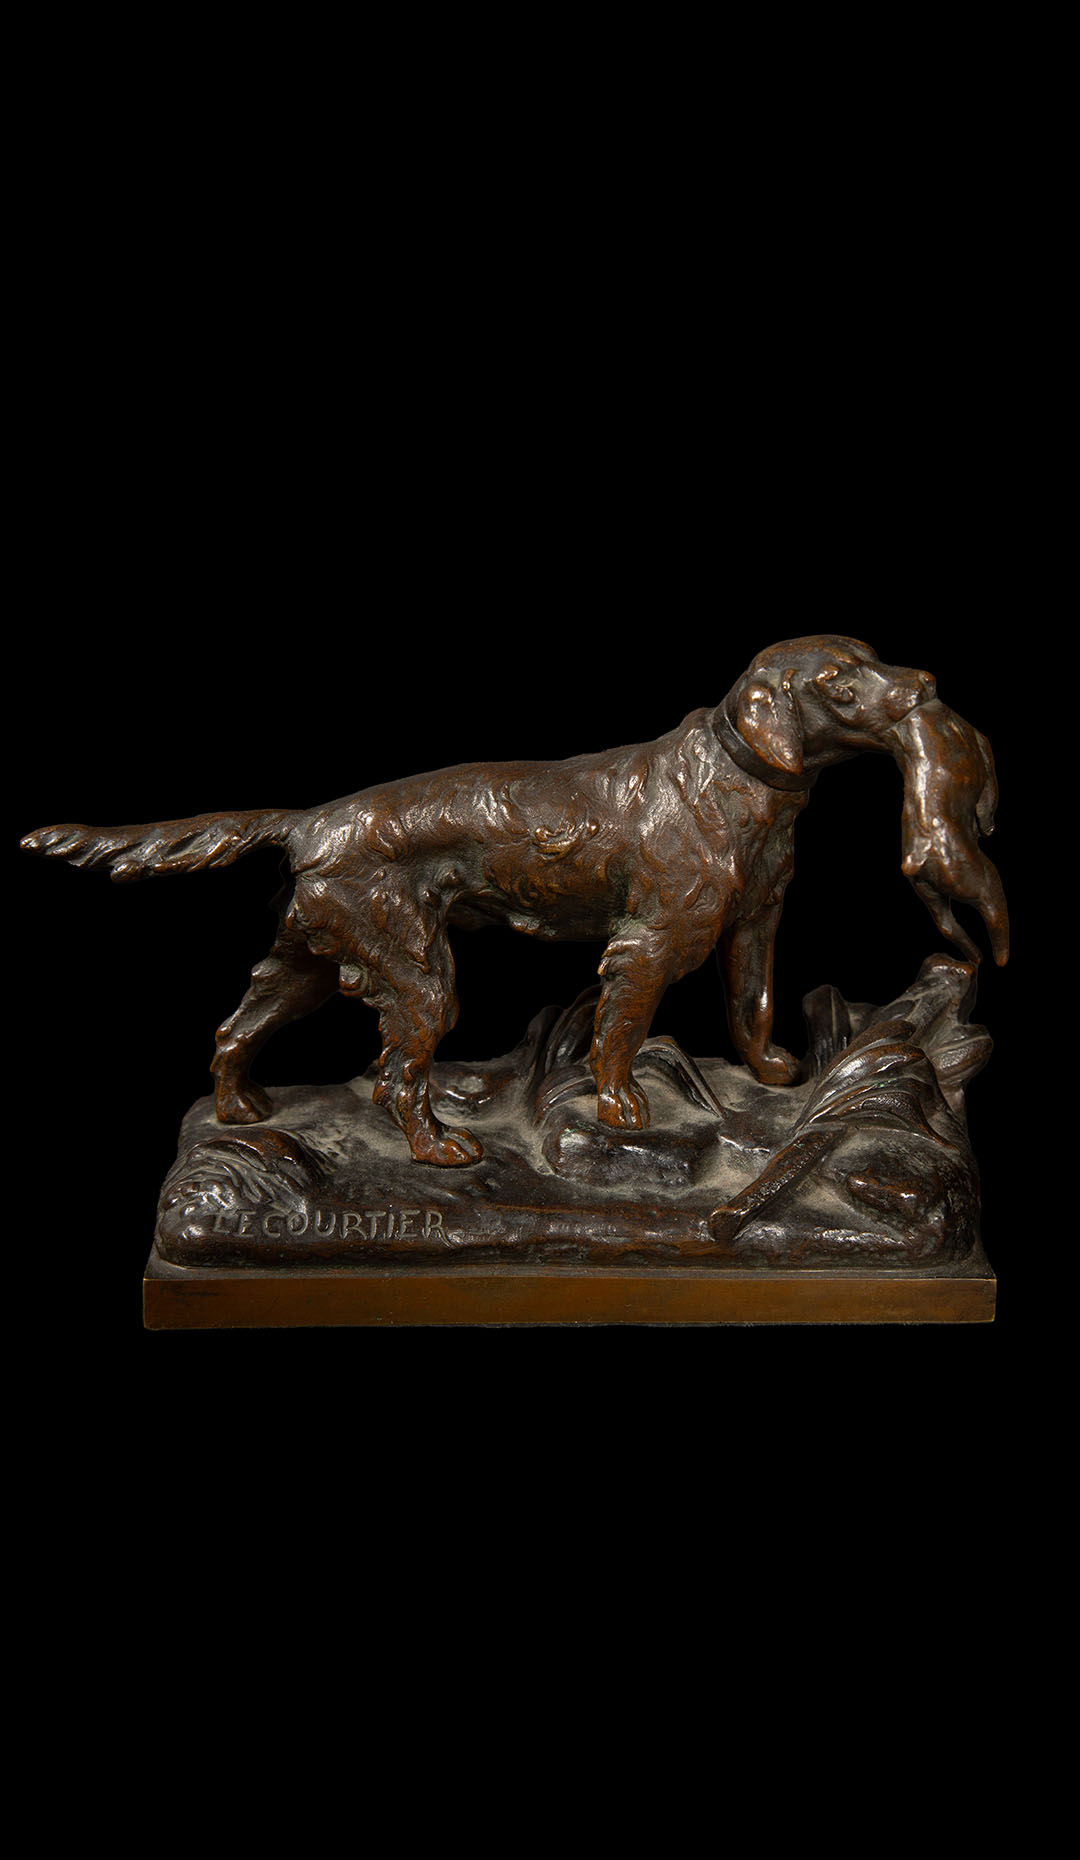 Late 19th Century Sculpture of a Hunting Dog By Lecourtier